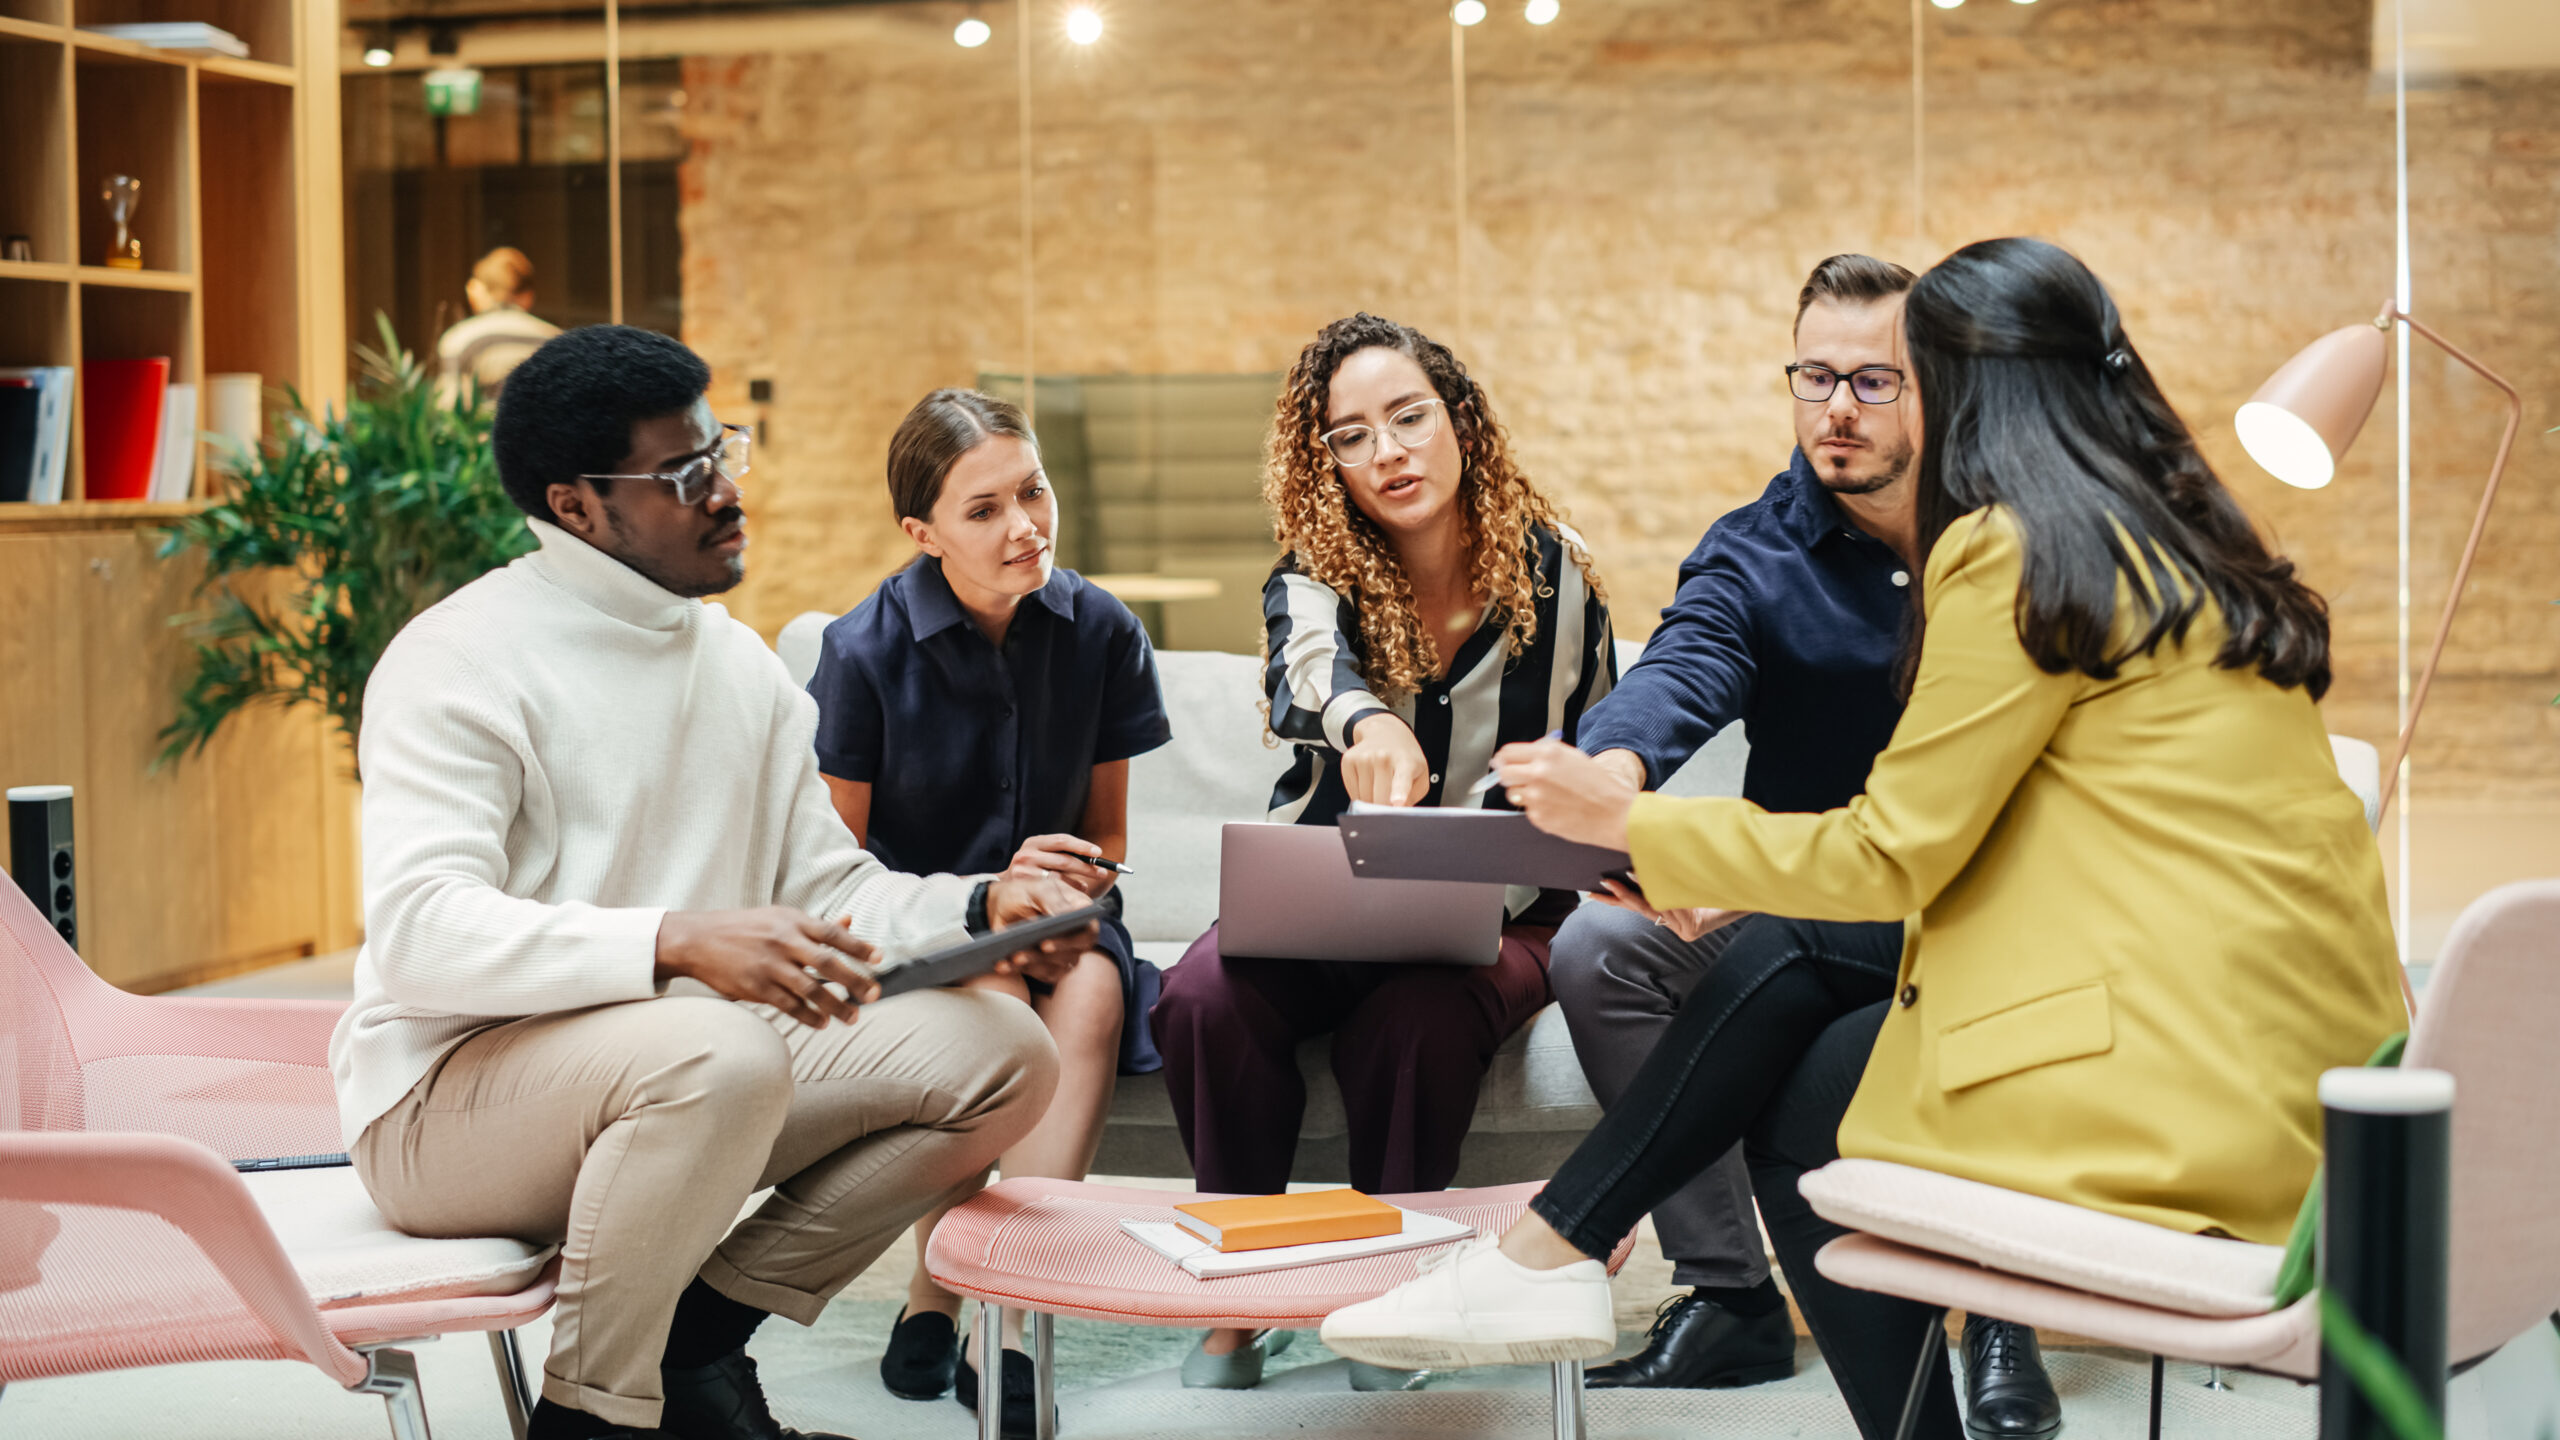 An enthusiastic, diverse team discusses revamping your social media strategy in a bright, contemporary office setting, exemplifying collaboration and innovation.